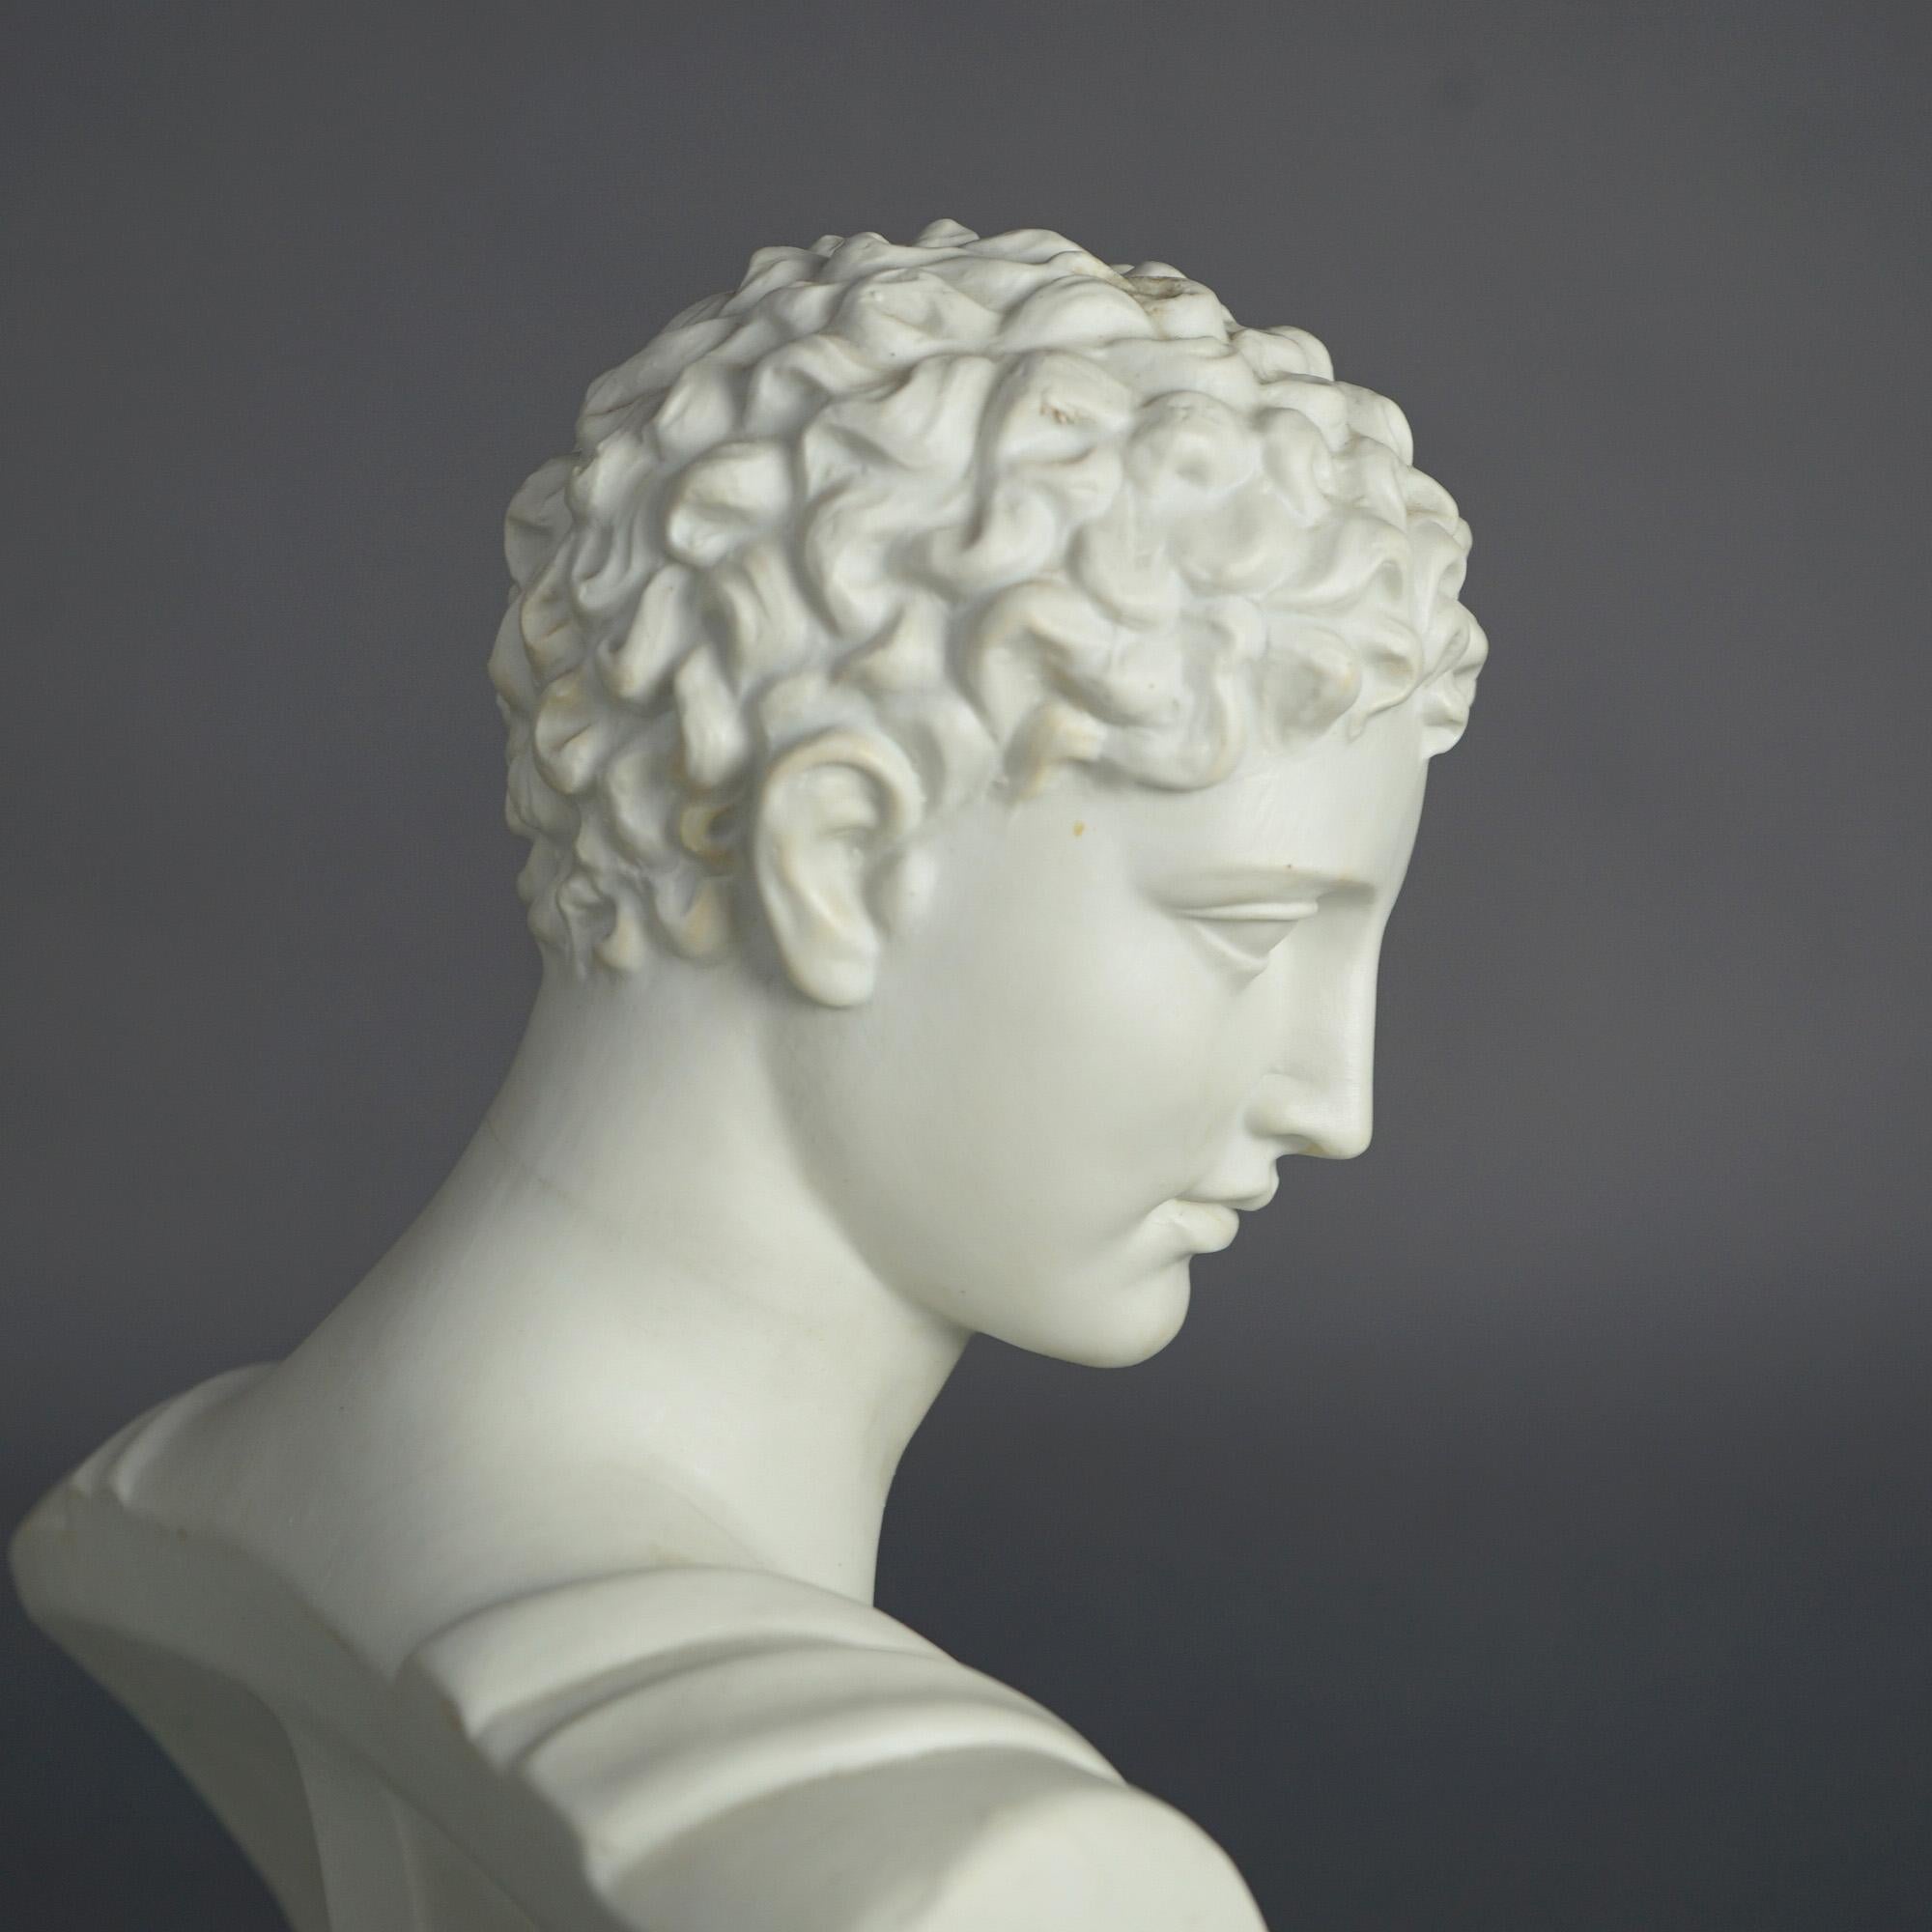 Antique French Neoclassical Parian Porcelain Bust of Michaelangelo's David C1900 3